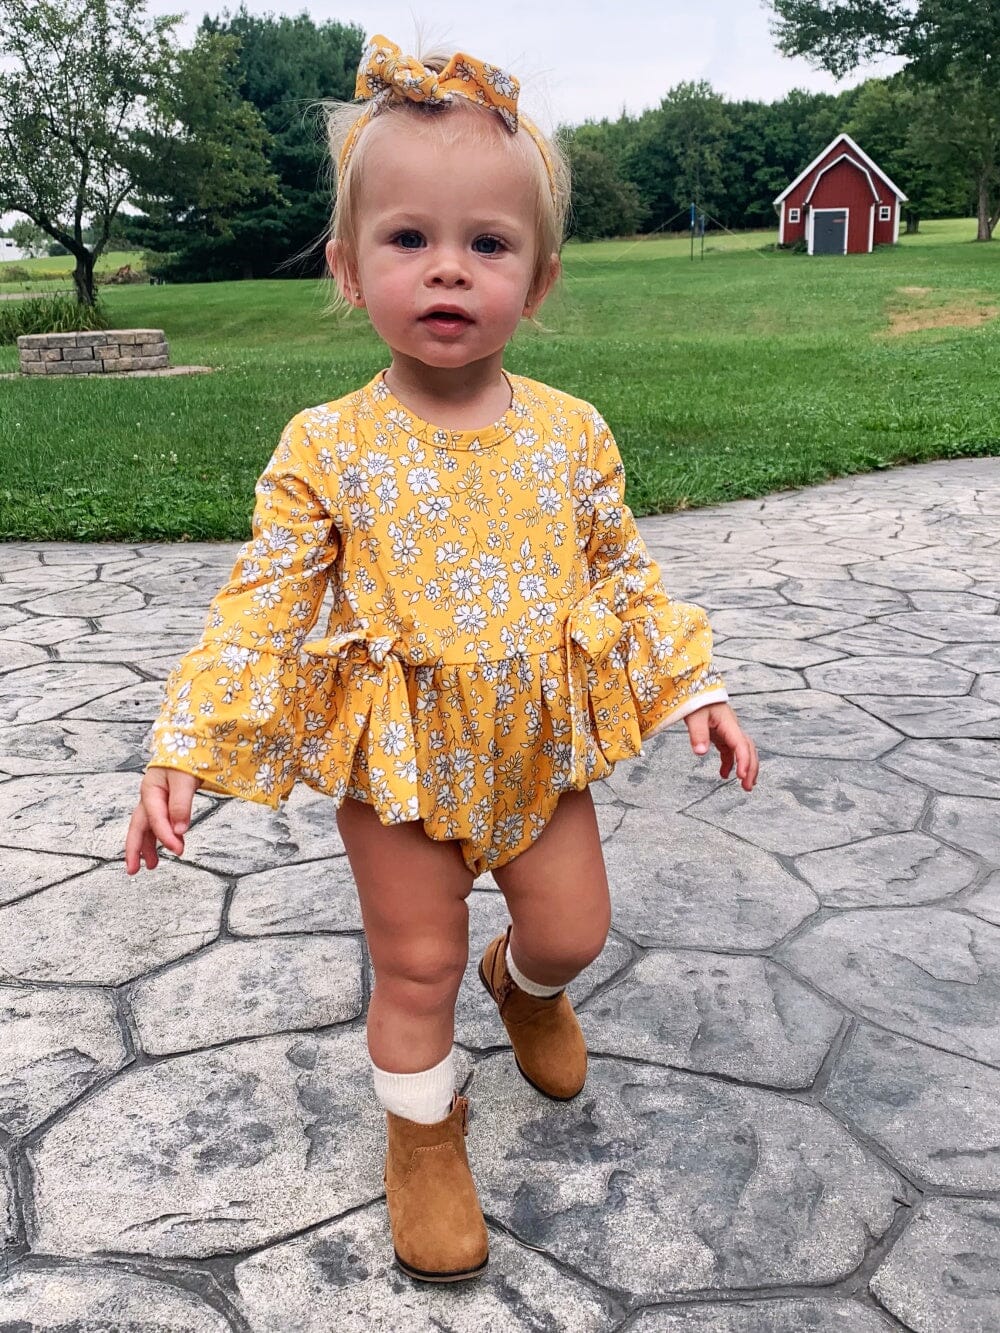 Floral Favorites - Our Favorite Sunflower Outfits, Daisy Dresses, & Flower Patterns